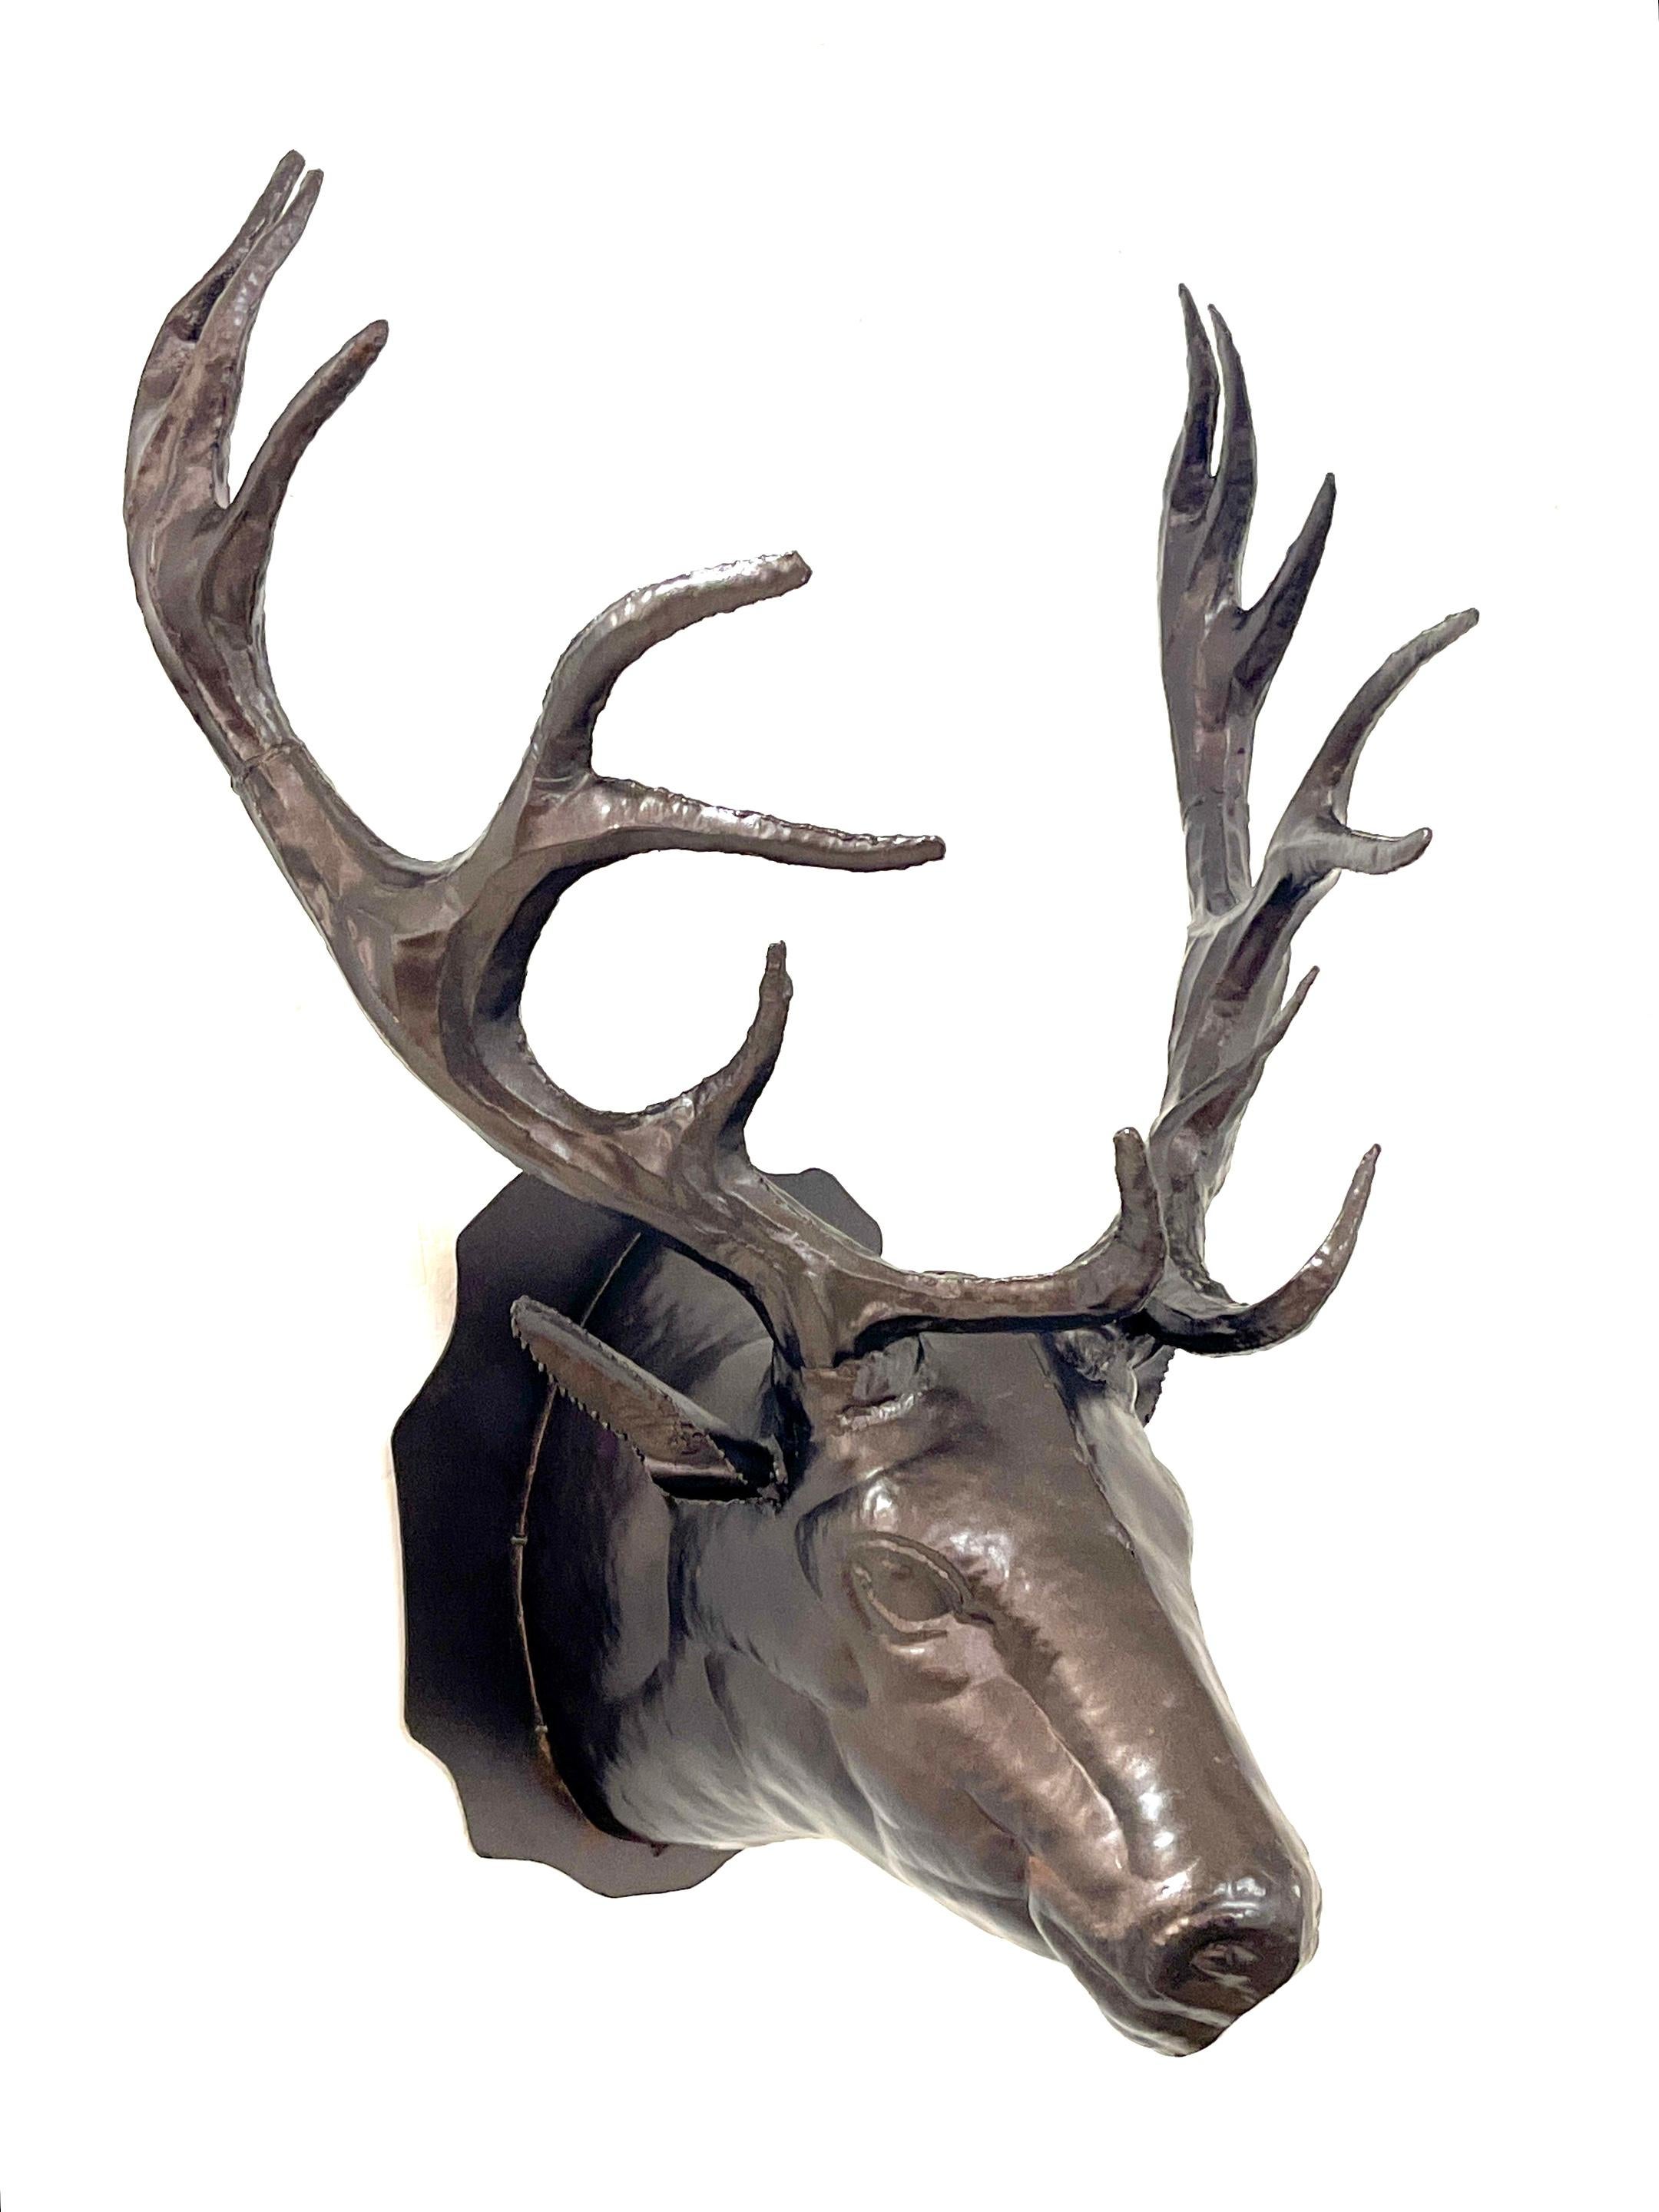 Bronzed Tole 14-point Buck Trophy Head Wall Mount 

A striking Bronzed Tole 14-point Buck Trophy Head Wall Mount, an great vintage sporting art sculpture. This impressive wall sculpture boasts a generous size and scale, capturing the essence of a